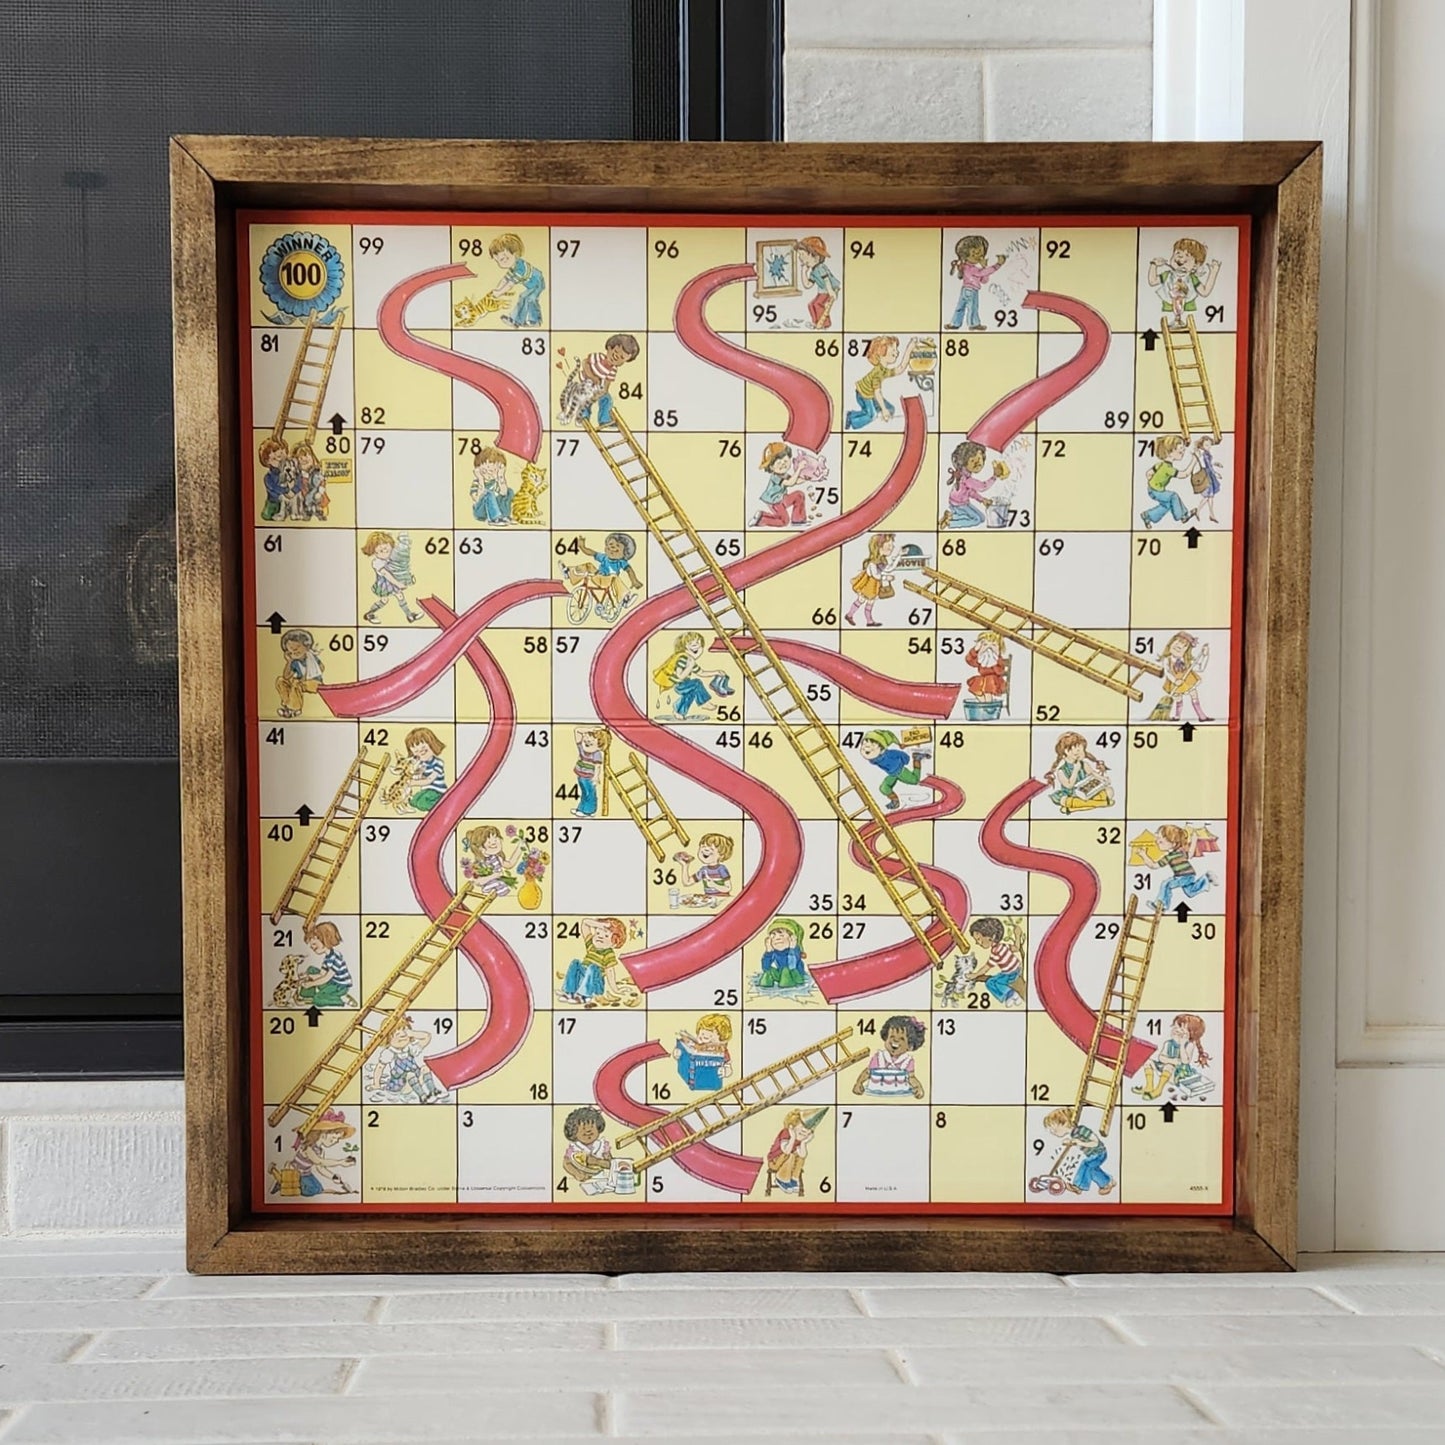 Display and Play 1979 Chutes and Ladders Handmade Framed Board Game